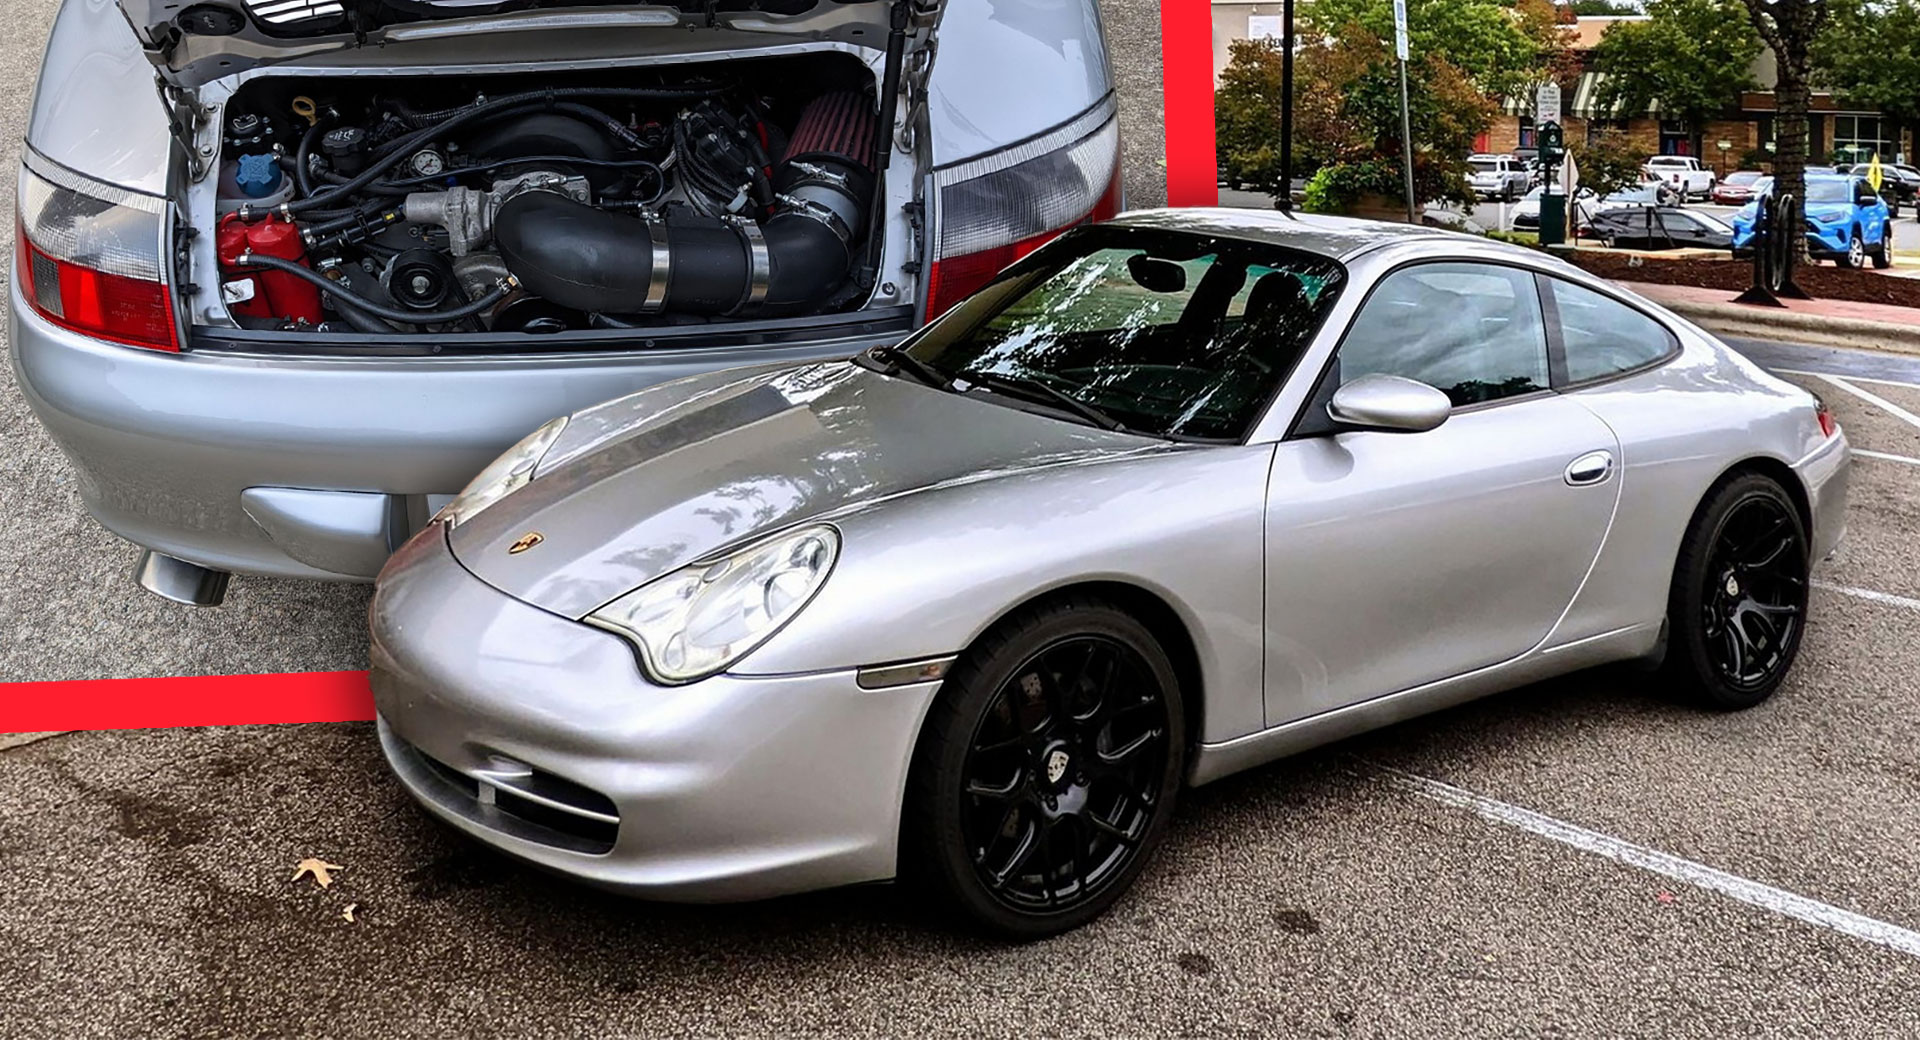 Water Under The Hood? This 2002 Porsche 911 Is Powered By A 6.0-liter Pontiac G8 GT V8